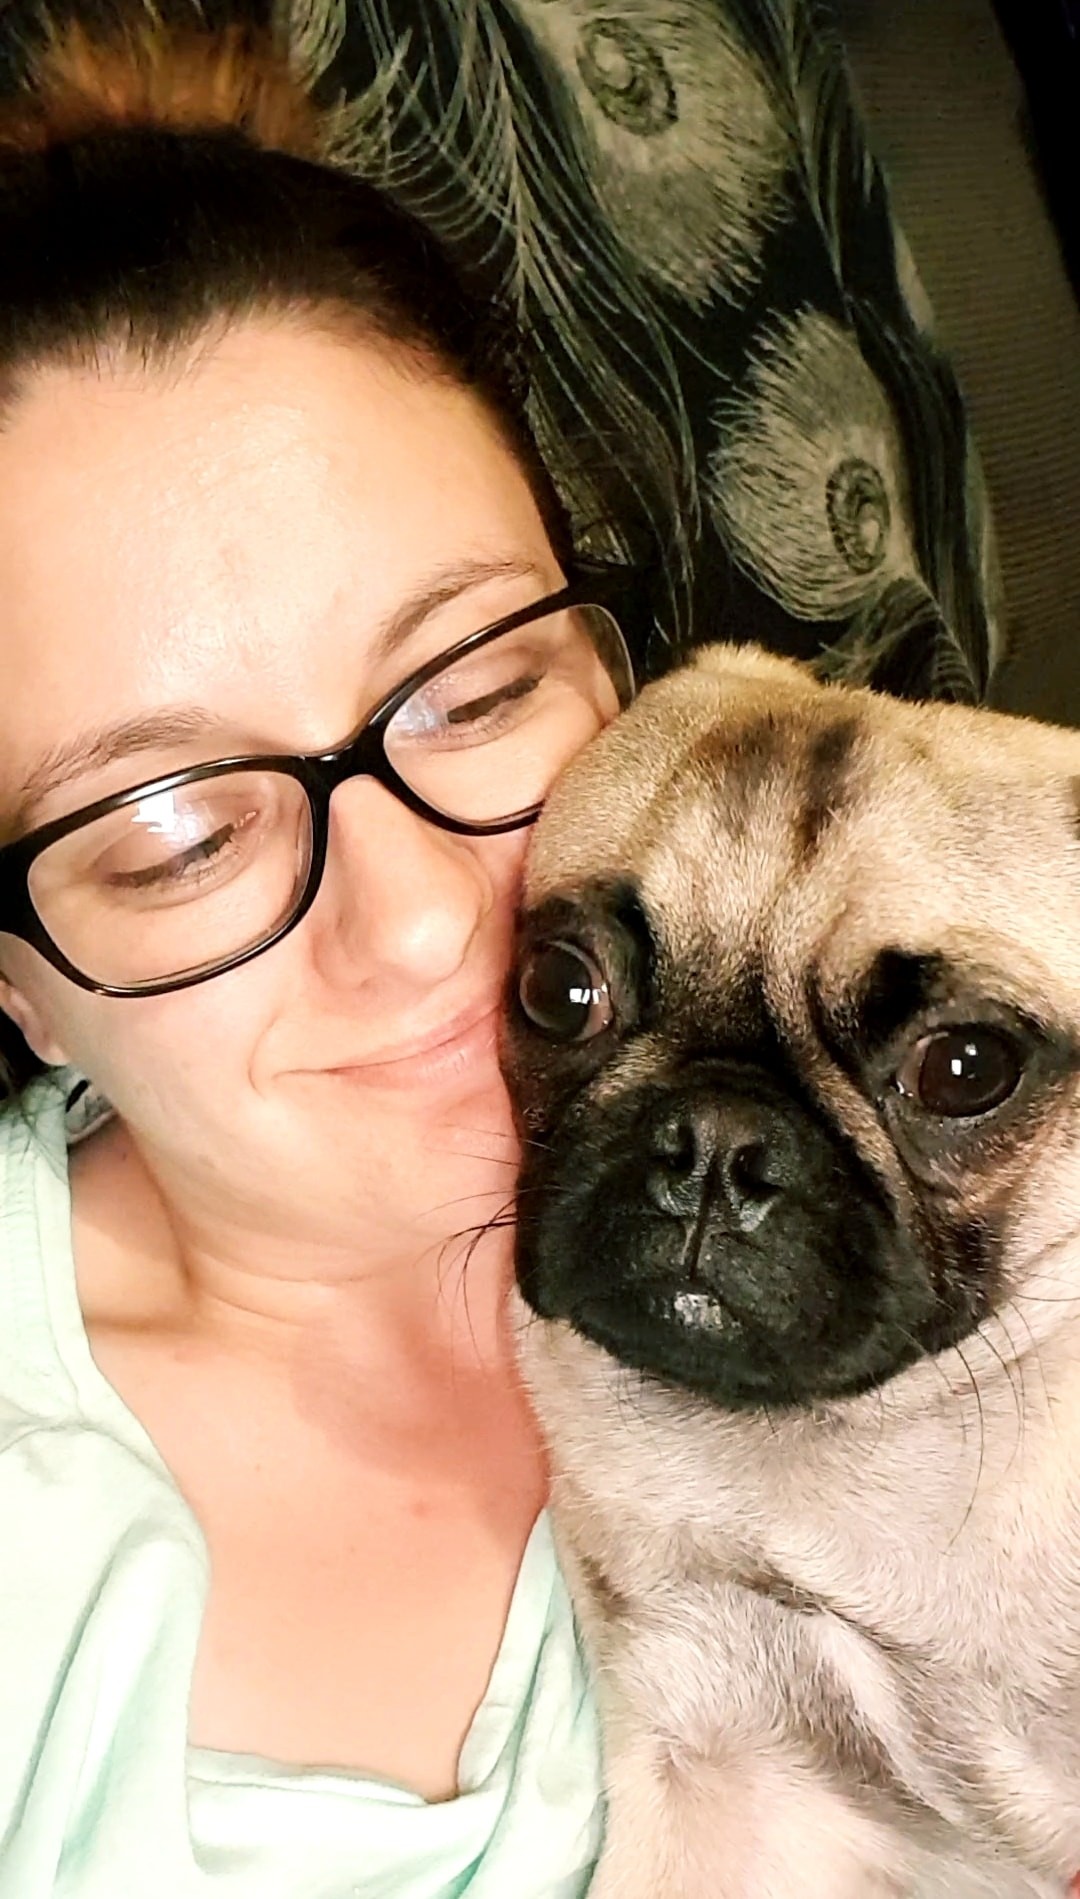 "This is Bosco, our pug. He is 1. After losing my dad suddenly, he has been a great comfort - especially on low days." - Carrie-Ann Marshall